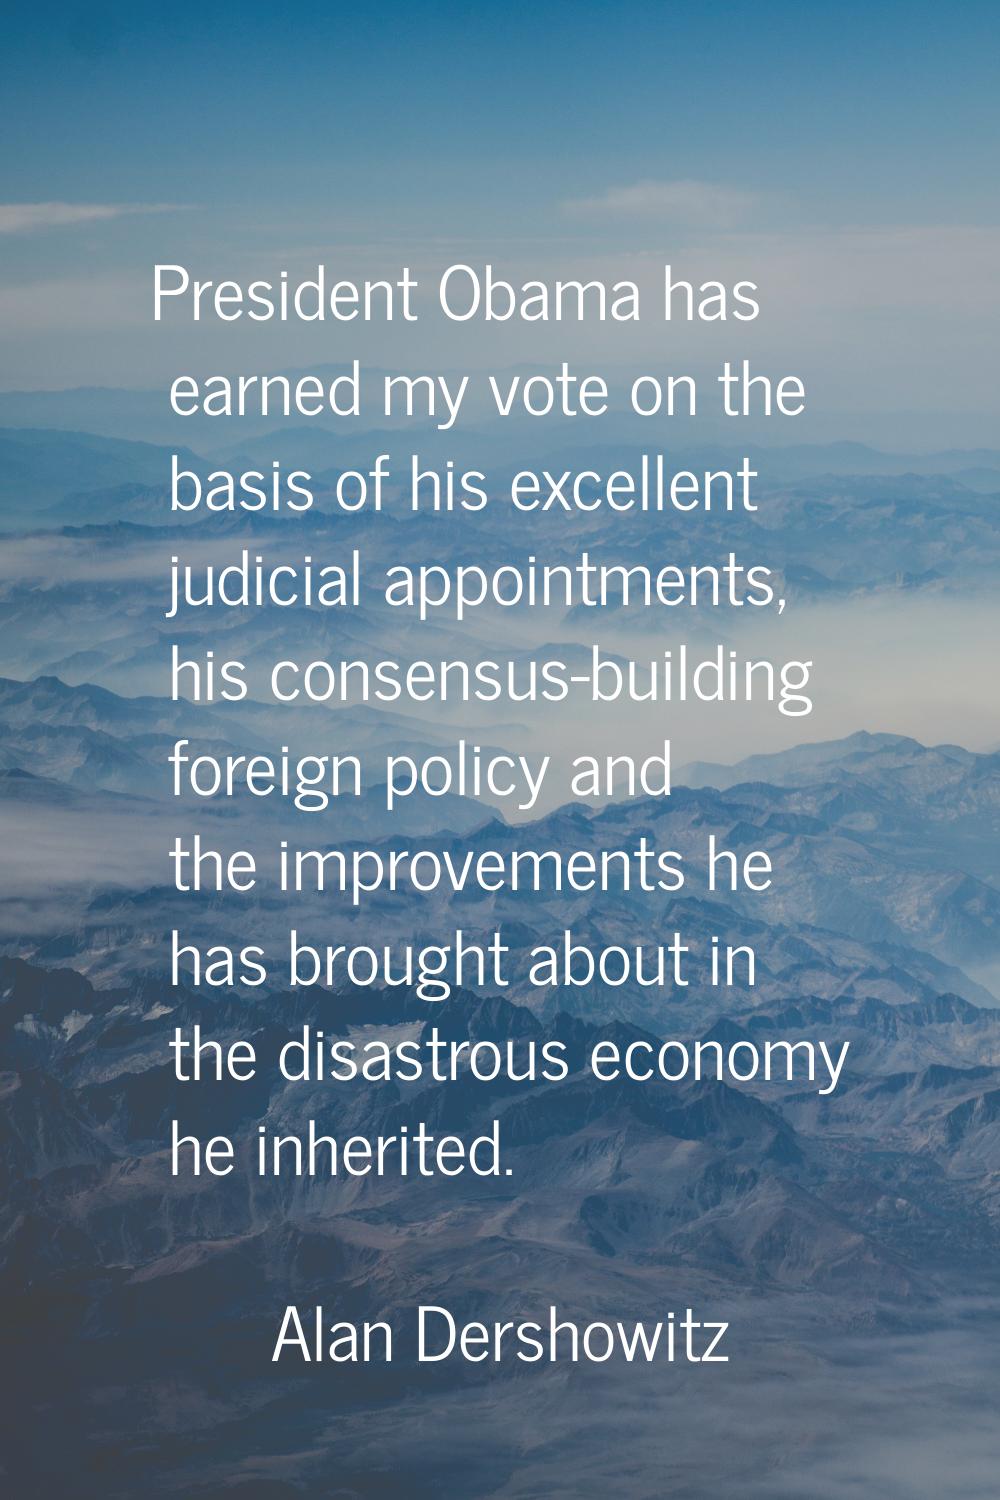 President Obama has earned my vote on the basis of his excellent judicial appointments, his consens